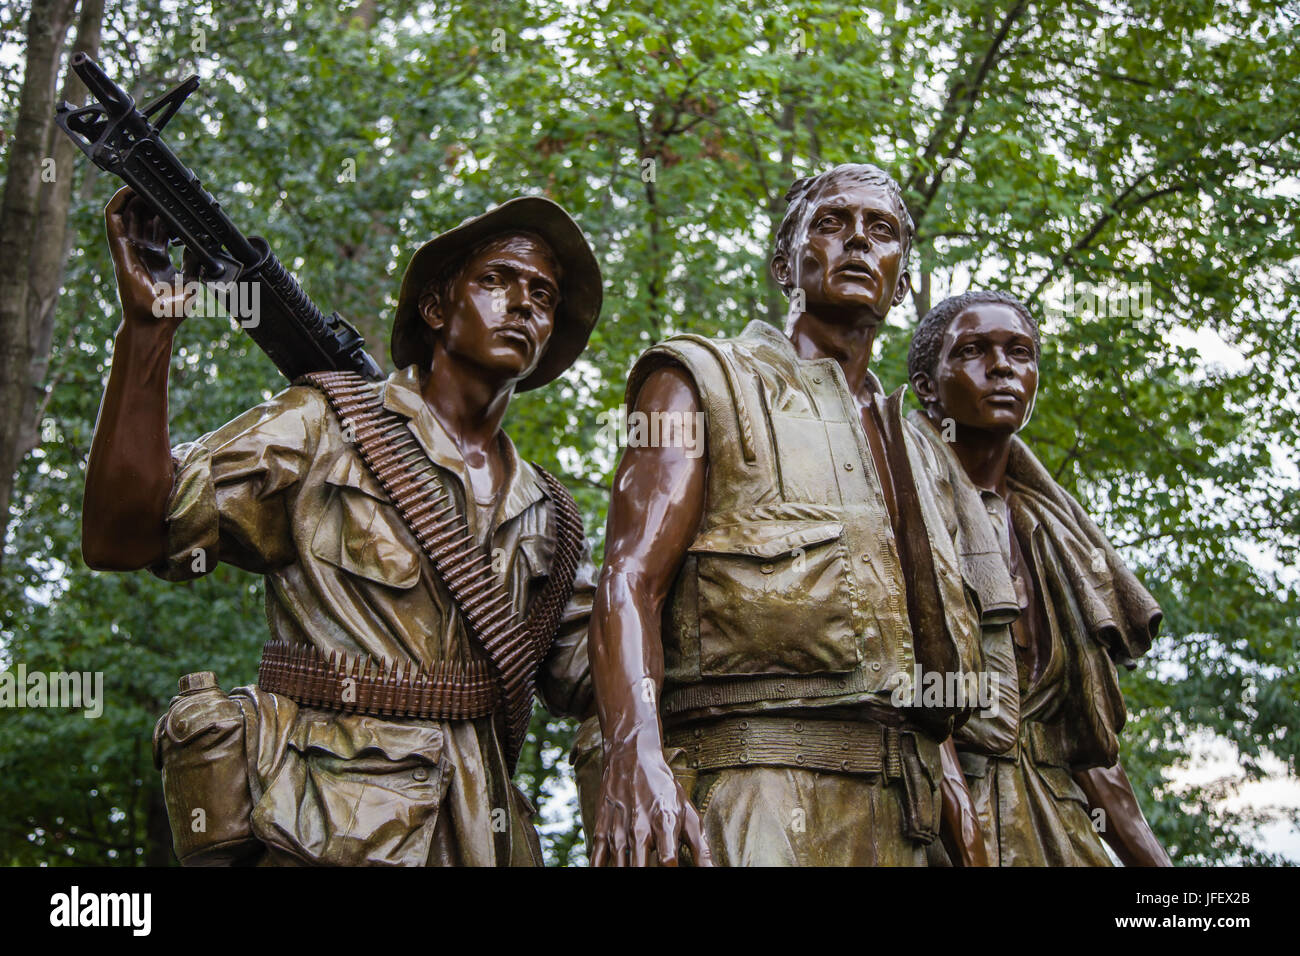 Washington DC, United States of America - June 20, 2009: Close-up of 'The Three Soldiers' statue by Frederick Hart. Located in the Vietnam Veterans Me Stock Photo